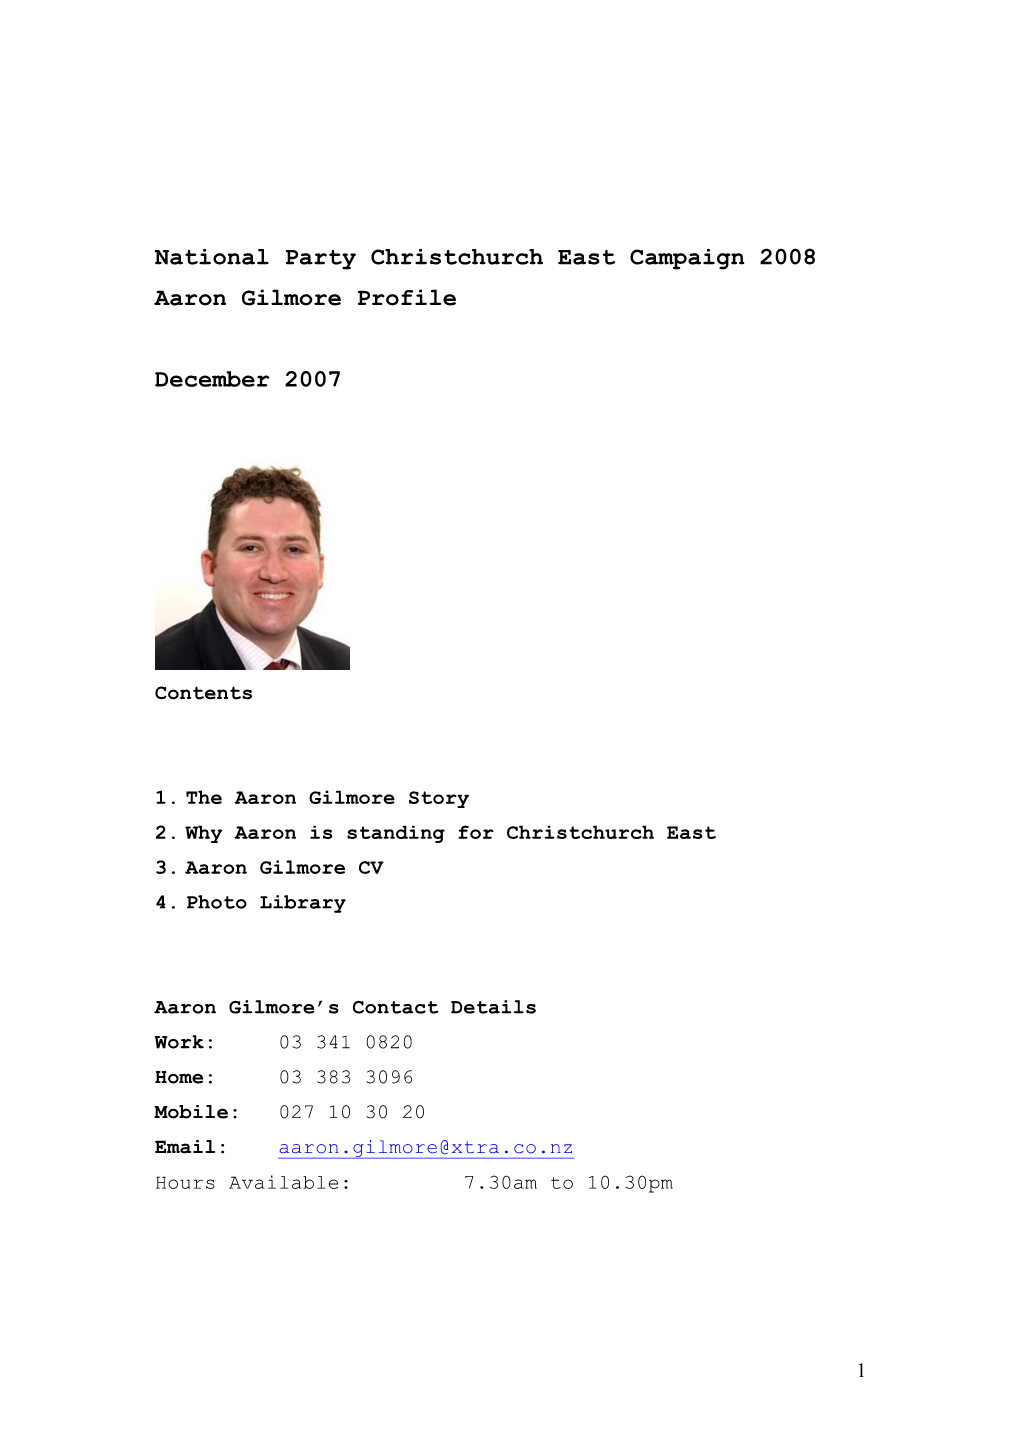 Christchurch East Campaign 2008 Aaron Gilmore Profile